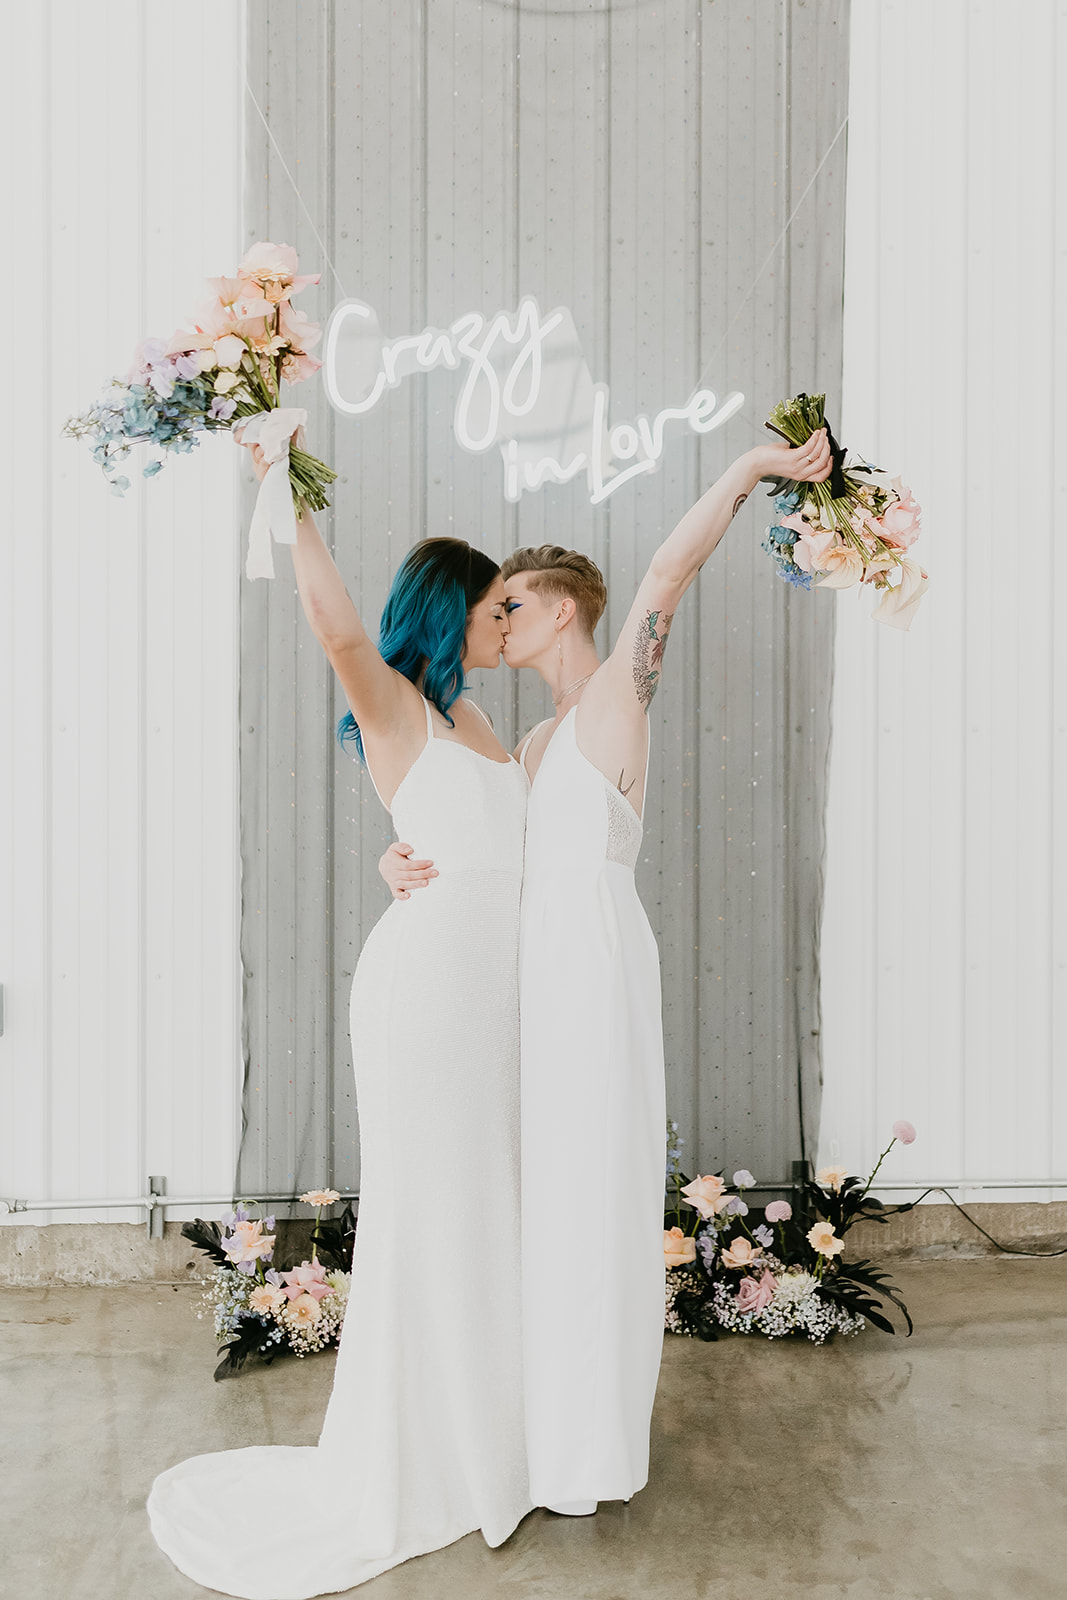 This Crazy in Love Holographic Wedding Inspiration Will Make All Your Rainbow Dreams Come True